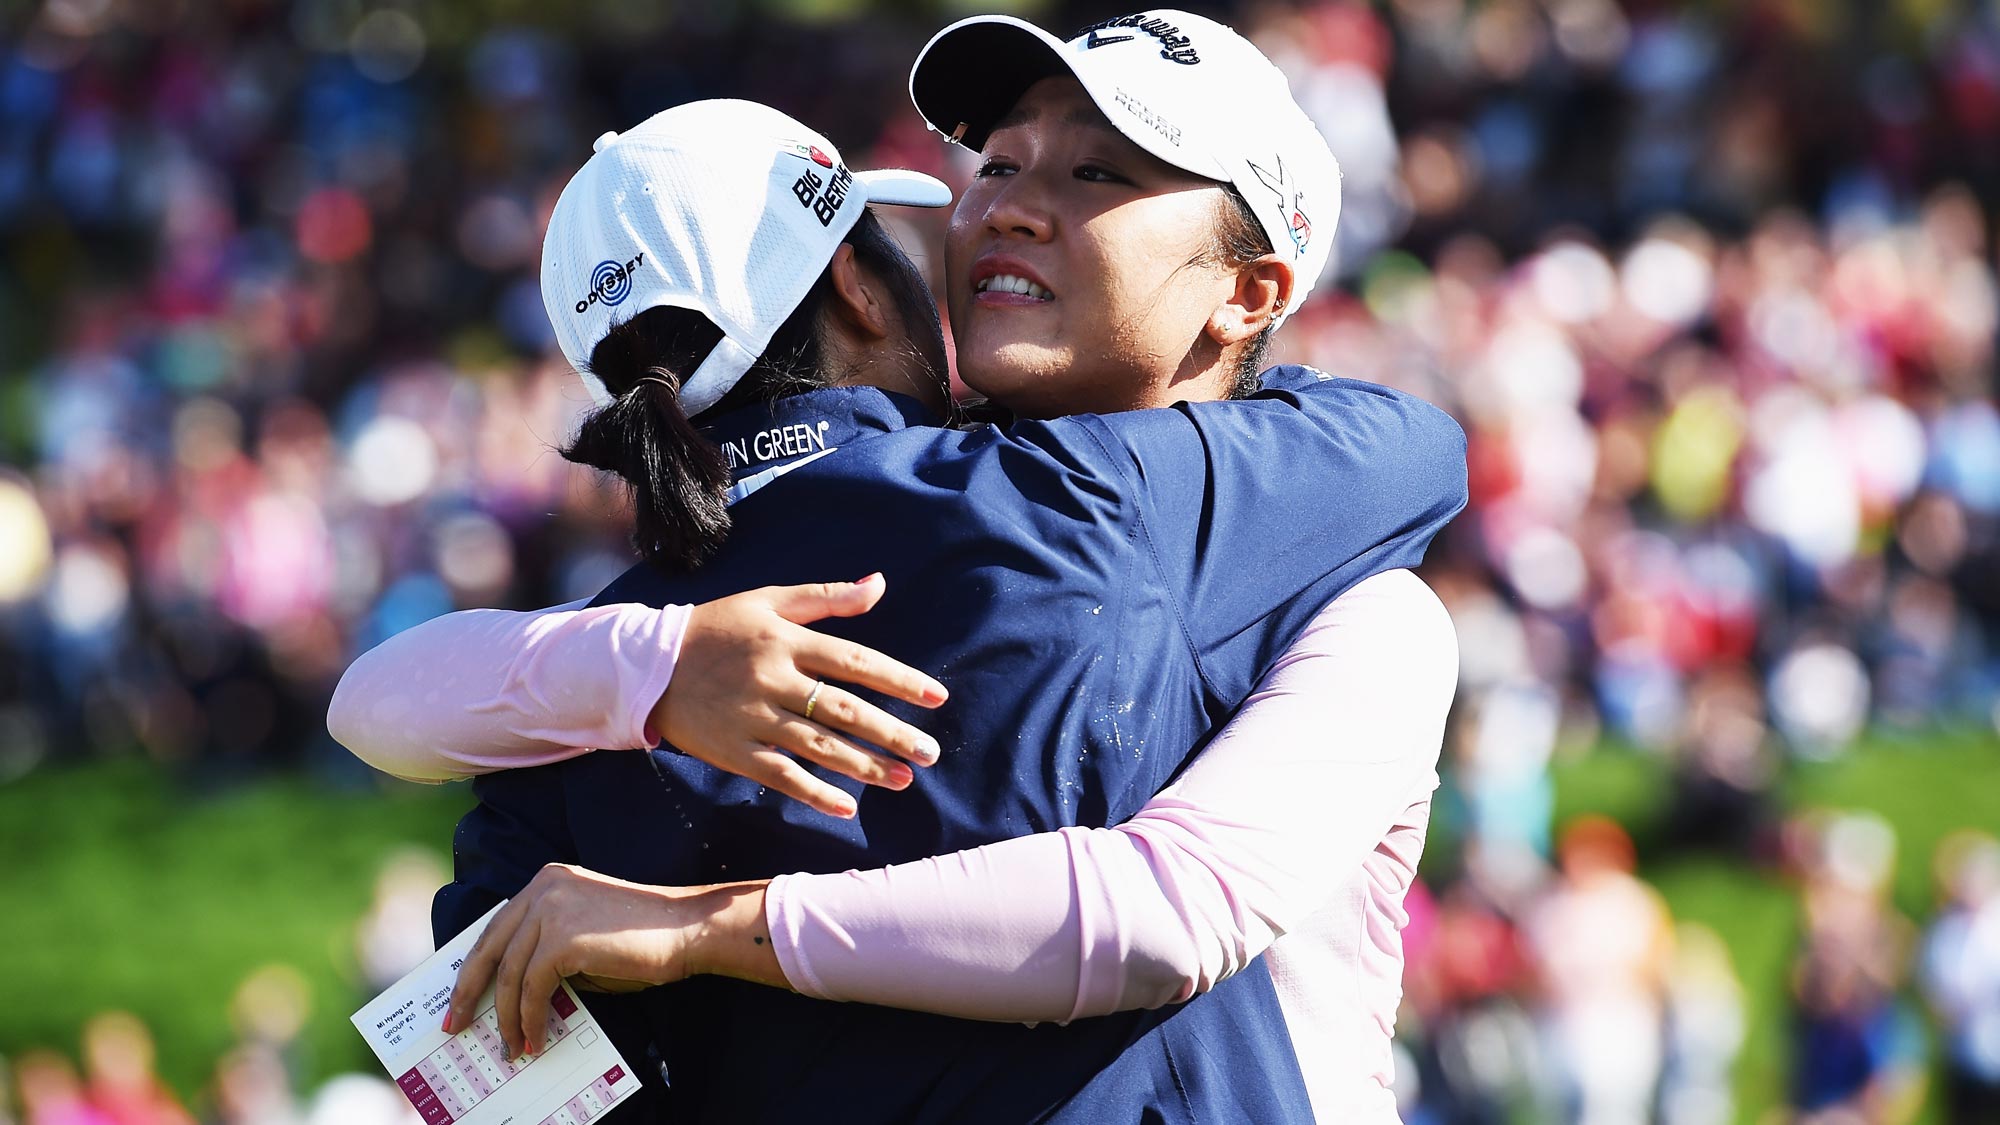 Lydia Ko of New Zealand celebrates winning on the 18th hole during the final round of the Evian Championship